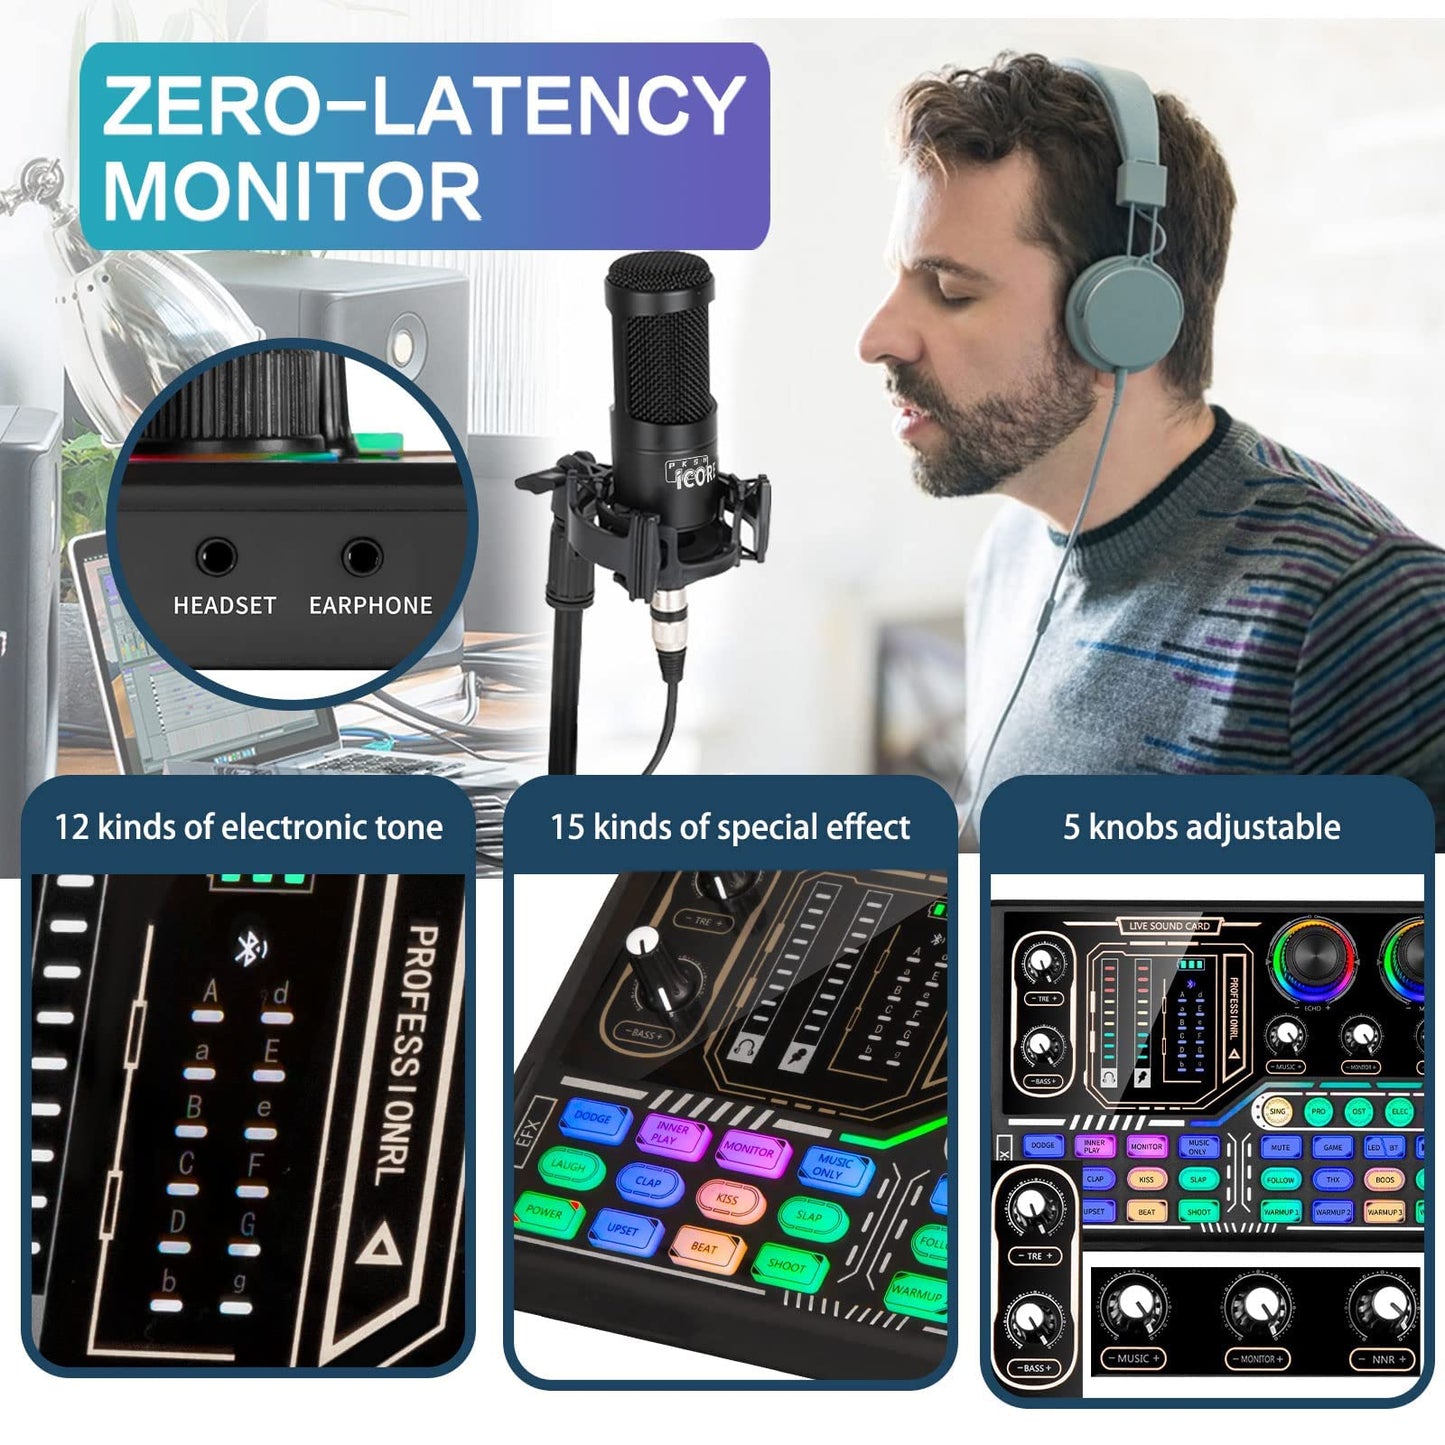 Podcast Equipment Bundle, Sound Card,Sound Board,Professional DJ Audio Interface Mixer, Portable ALL-IN-ONE Podcast Production Studio with XLR Microphone for Live Streaming, Recording and Gaming